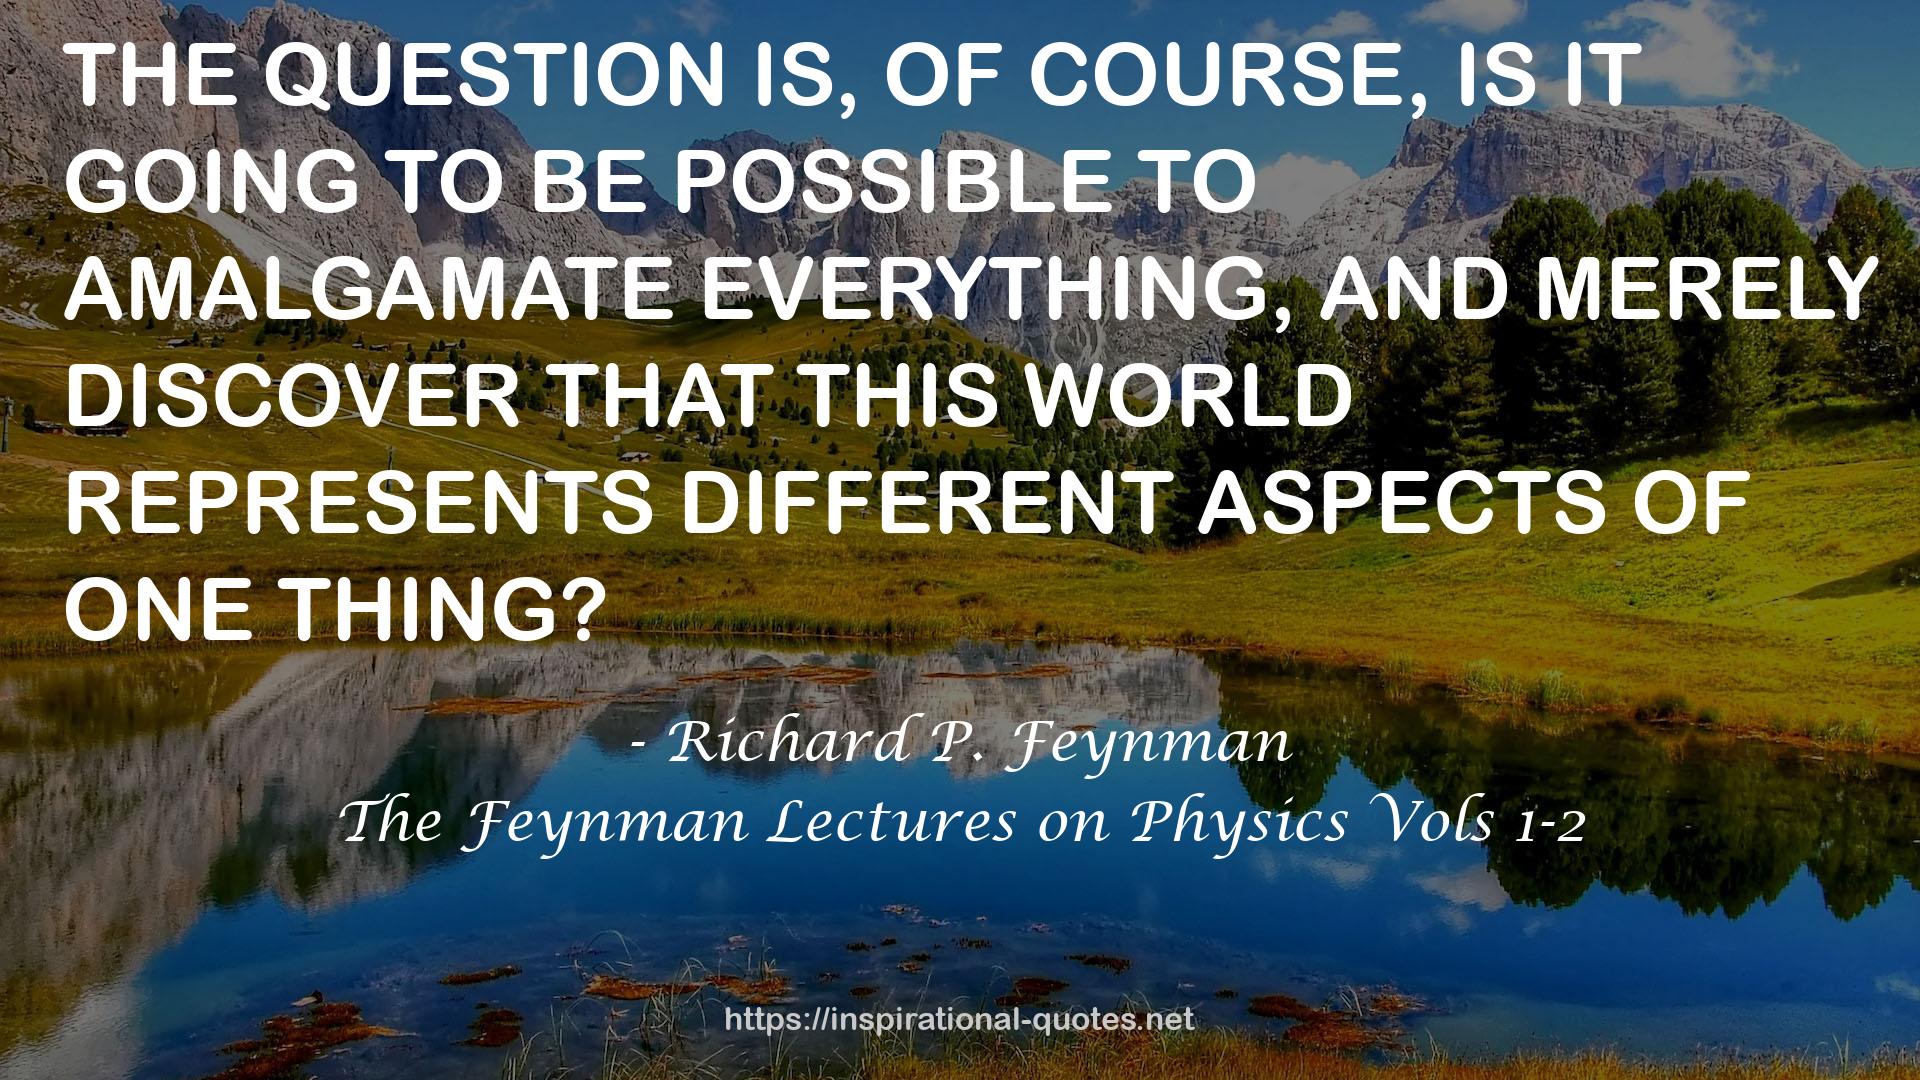 The Feynman Lectures on Physics Vols 1-2 QUOTES